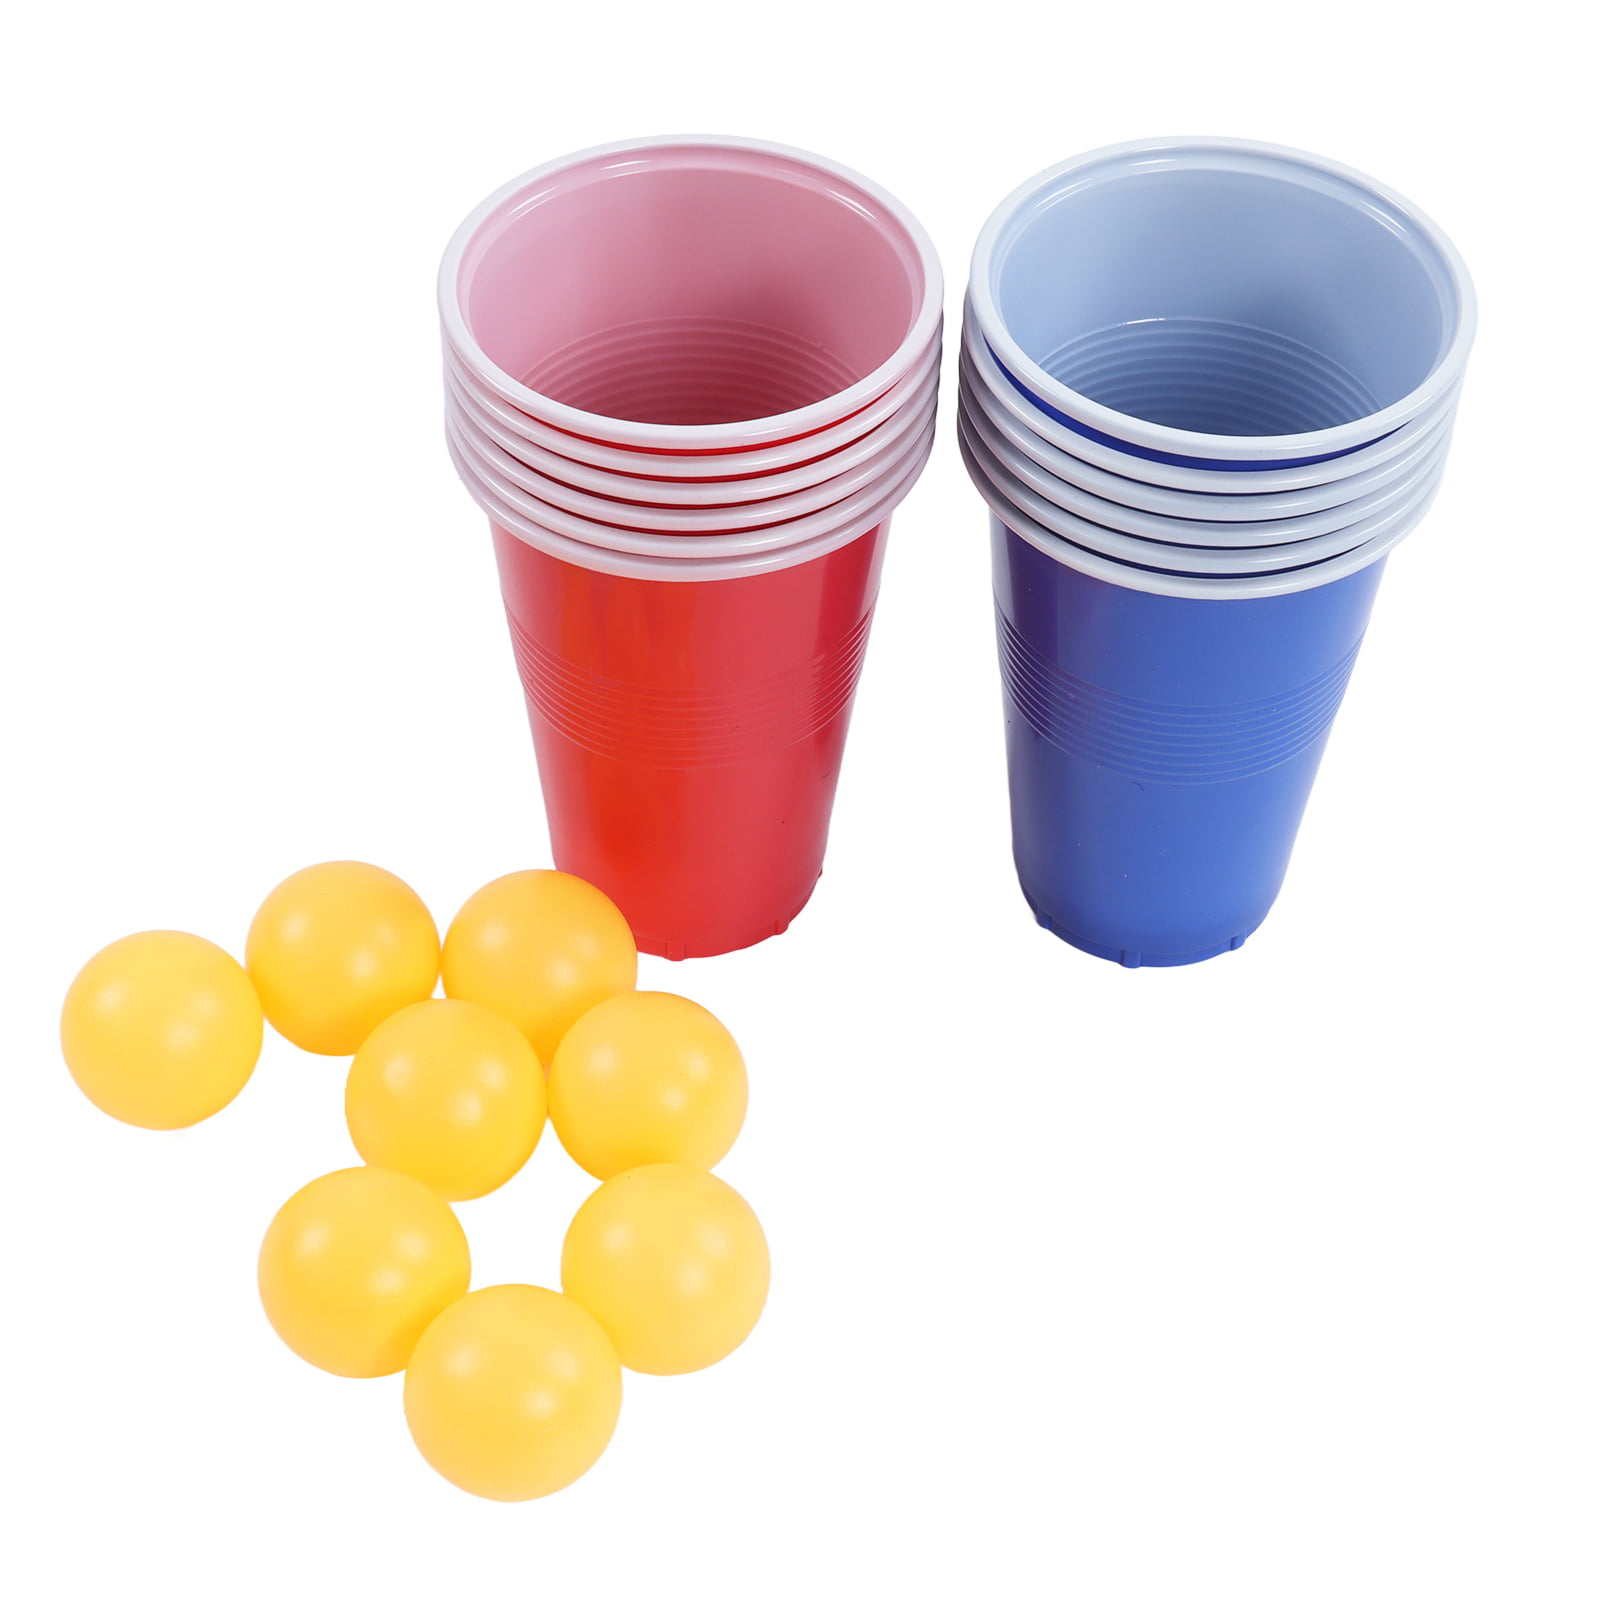  True XL Beer Pong Set with Jumbo Party Cups, Drinking Games for  Adults, Each Cup is 110 Ounces, Includes 20 Cups and 4 XL Pong Balls :  Sports & Outdoors